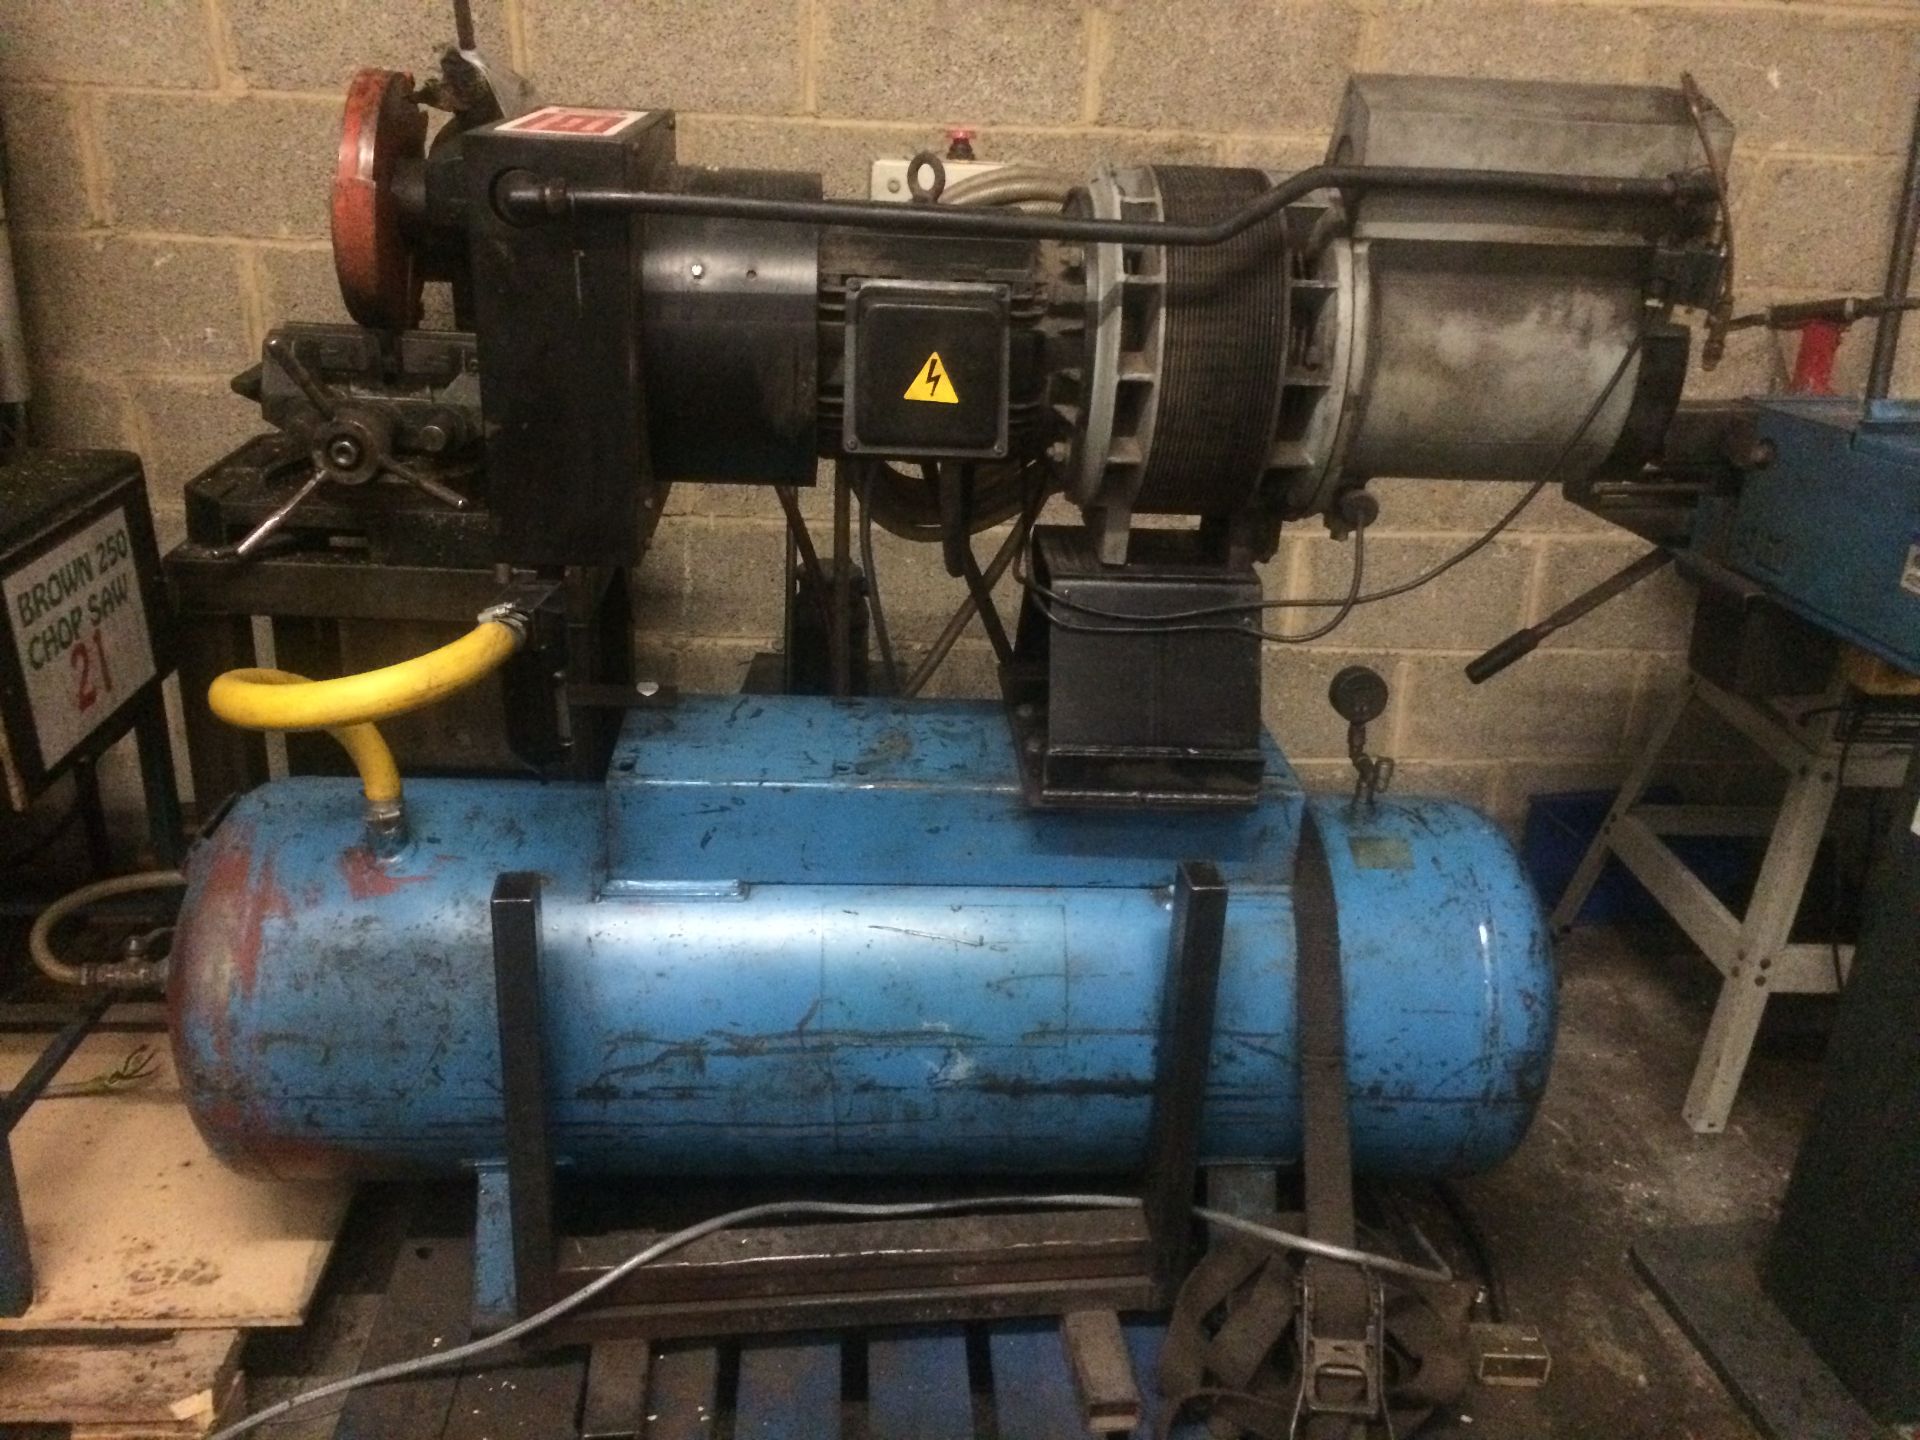 Hydrovane rotary vane compressor with air Receiver tank